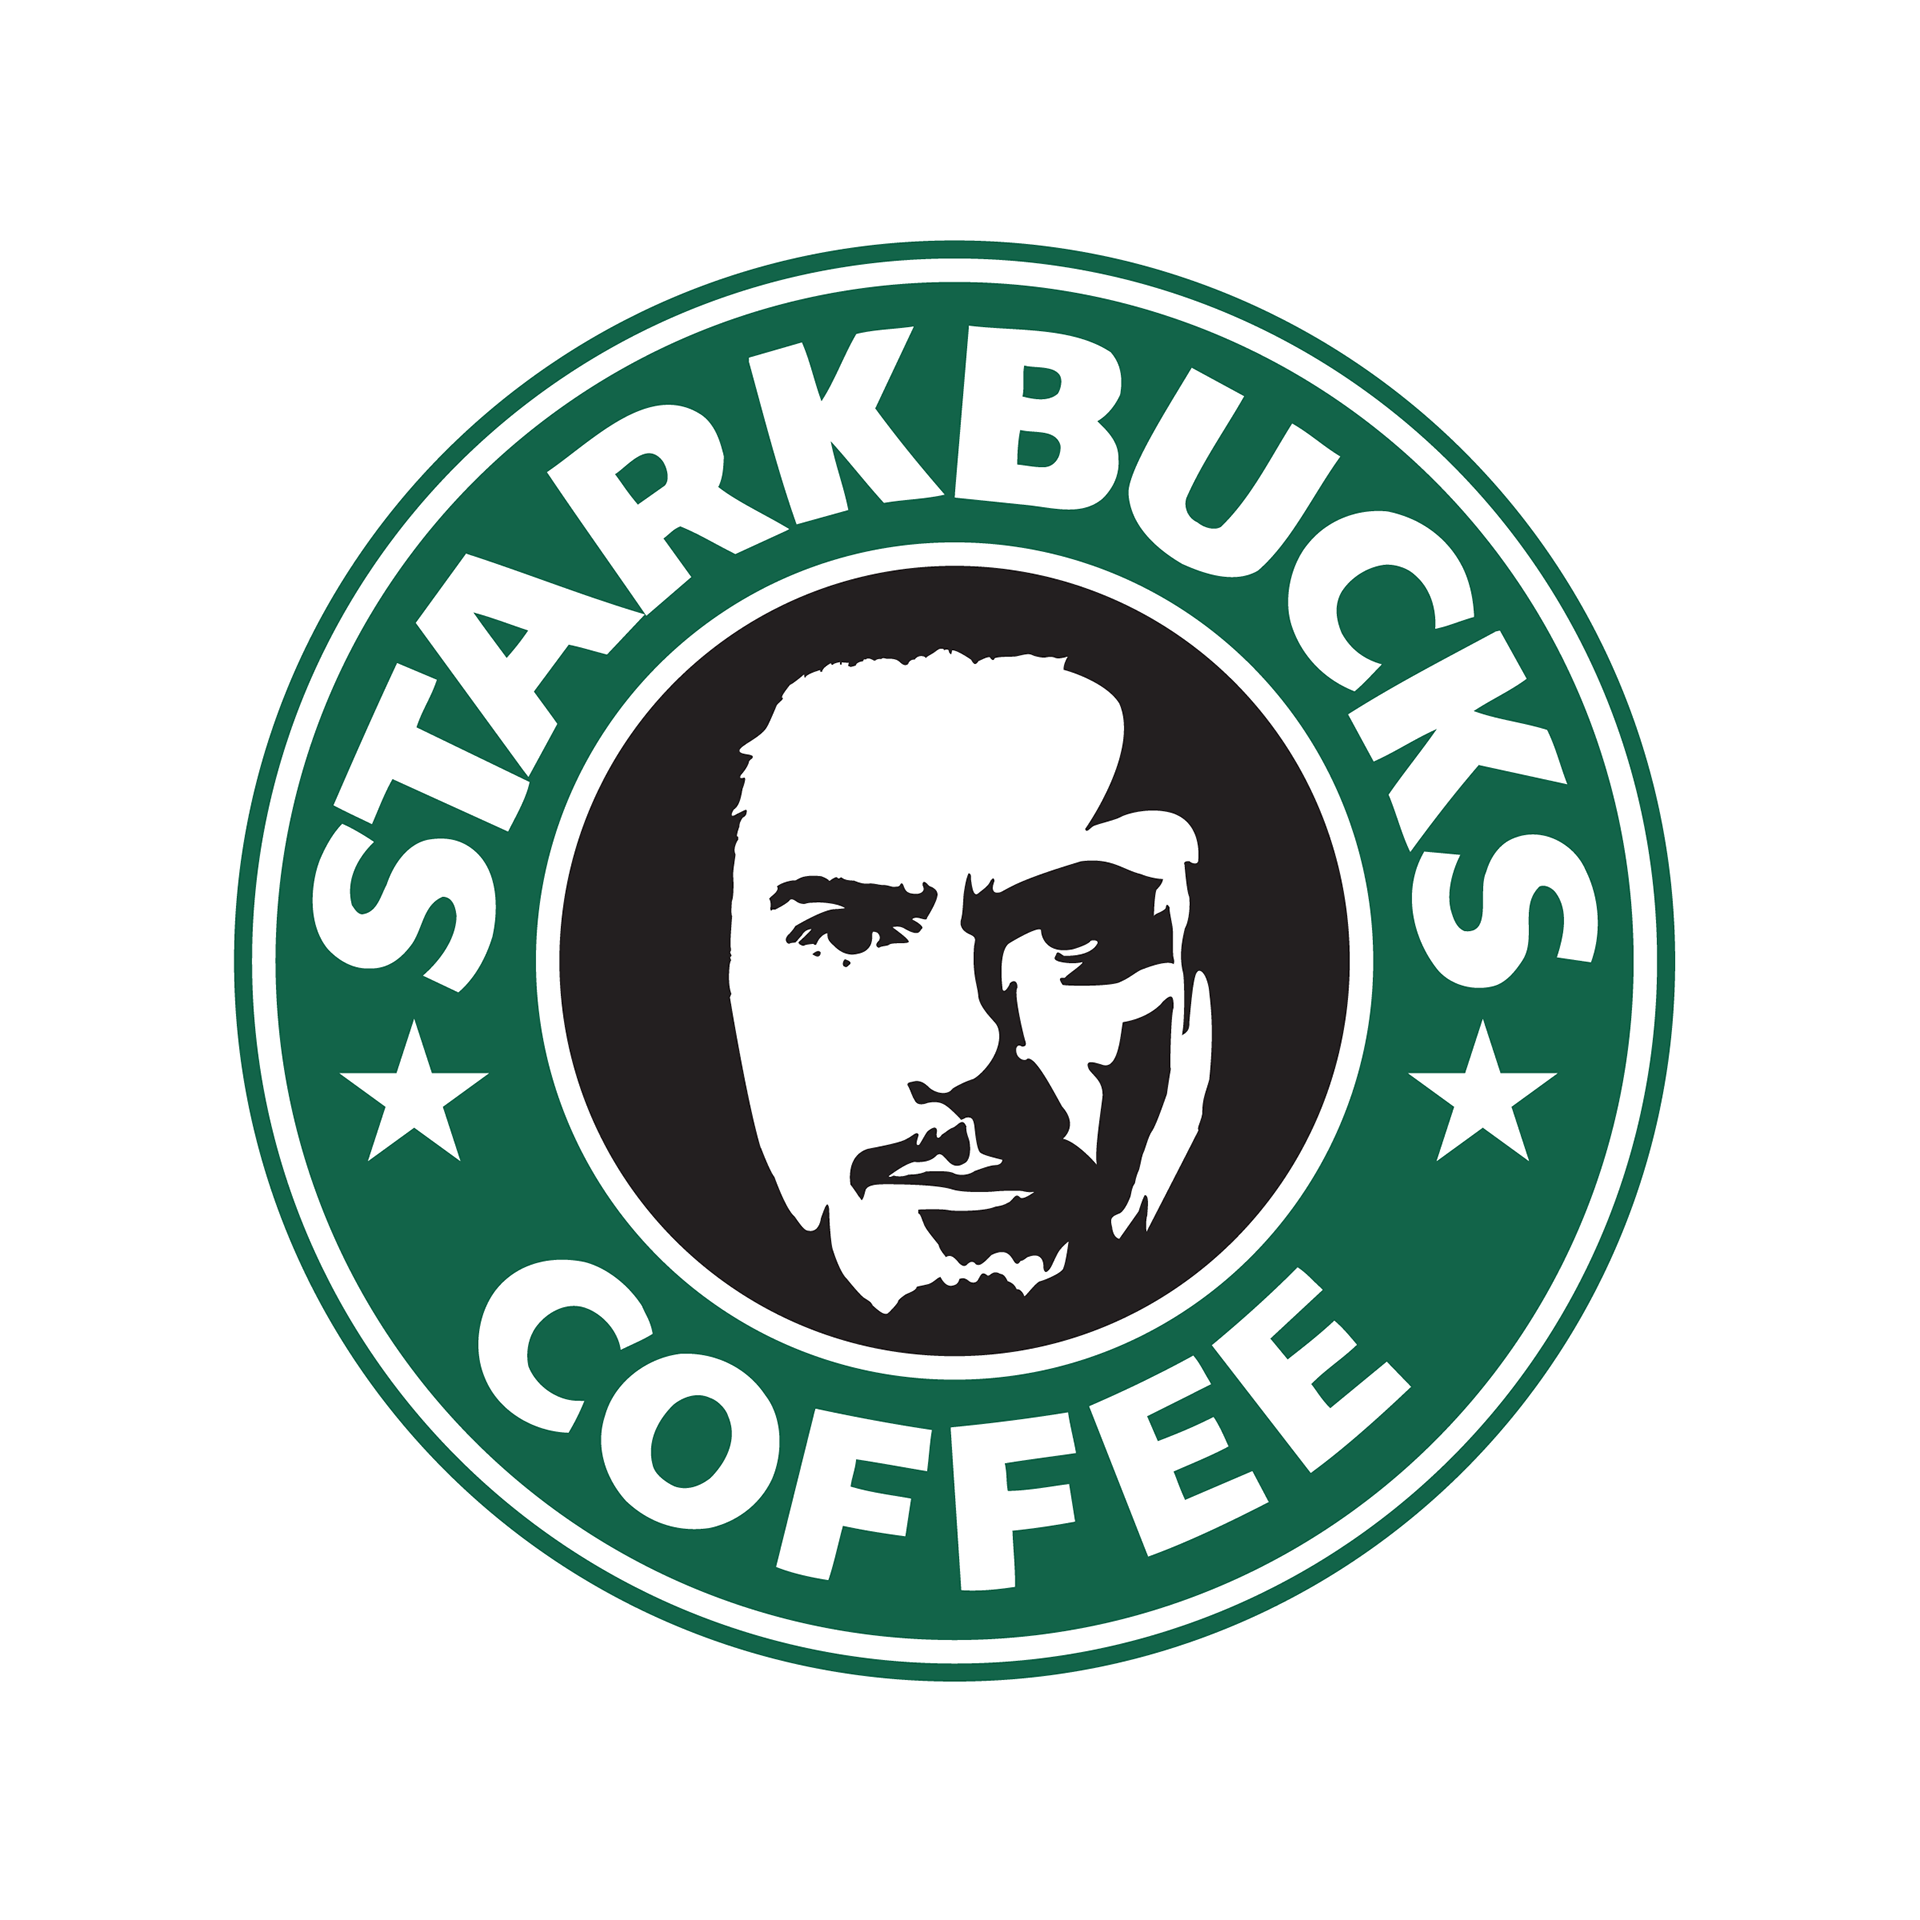 logo-coffee-starbucks-brand-cafe-coffee-png-download-1920-1920